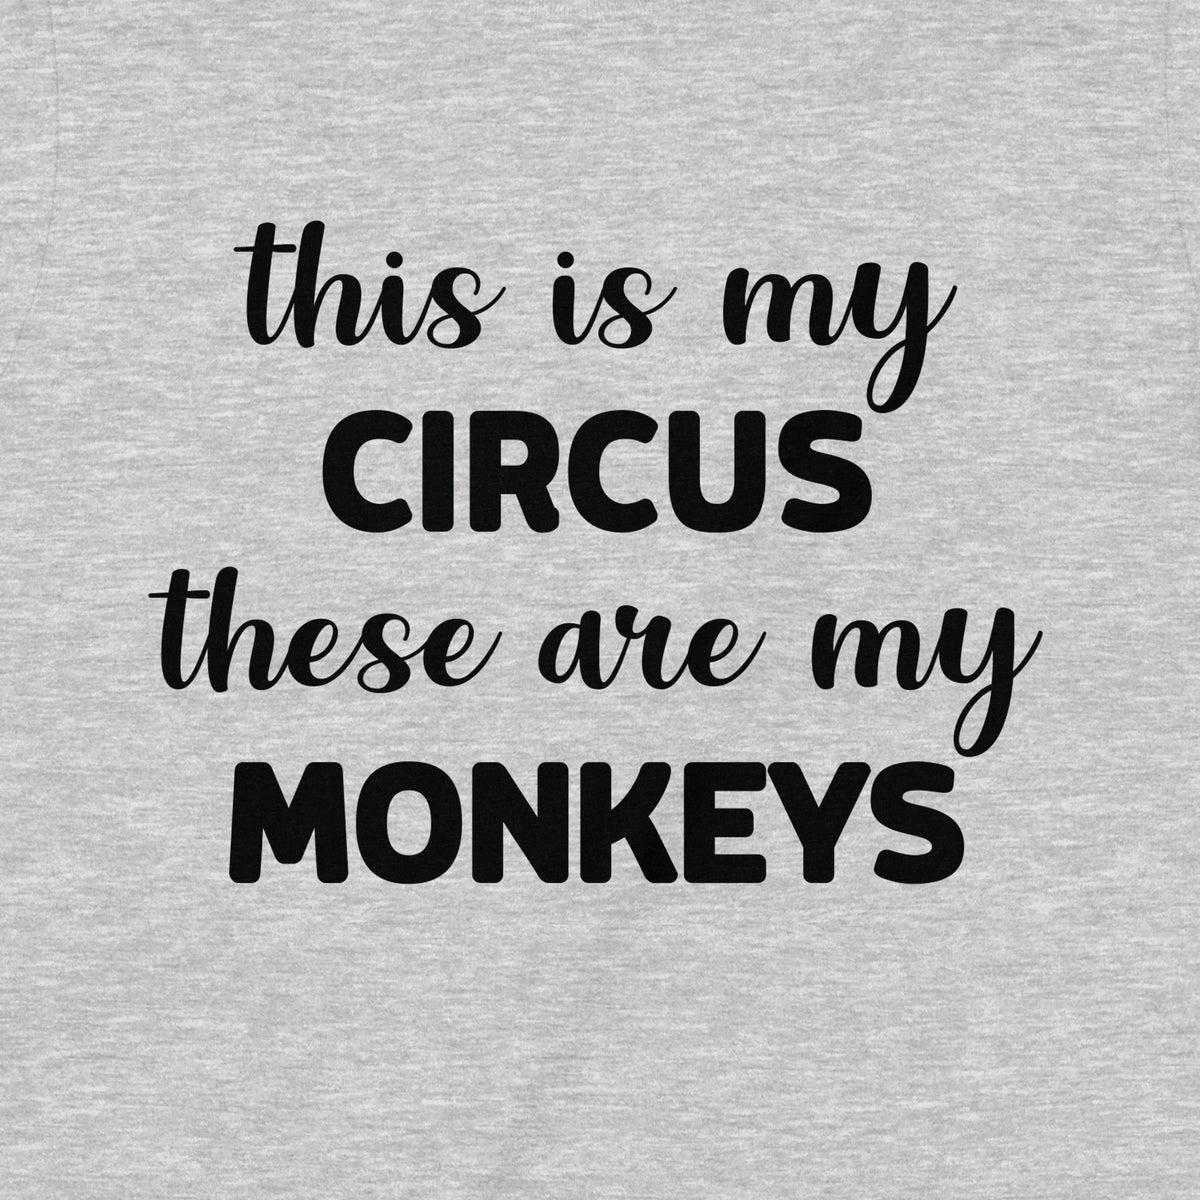 "This Is My Circus" Premium Midweight Ringspun Cotton T-Shirt - Mens/Womens Fits